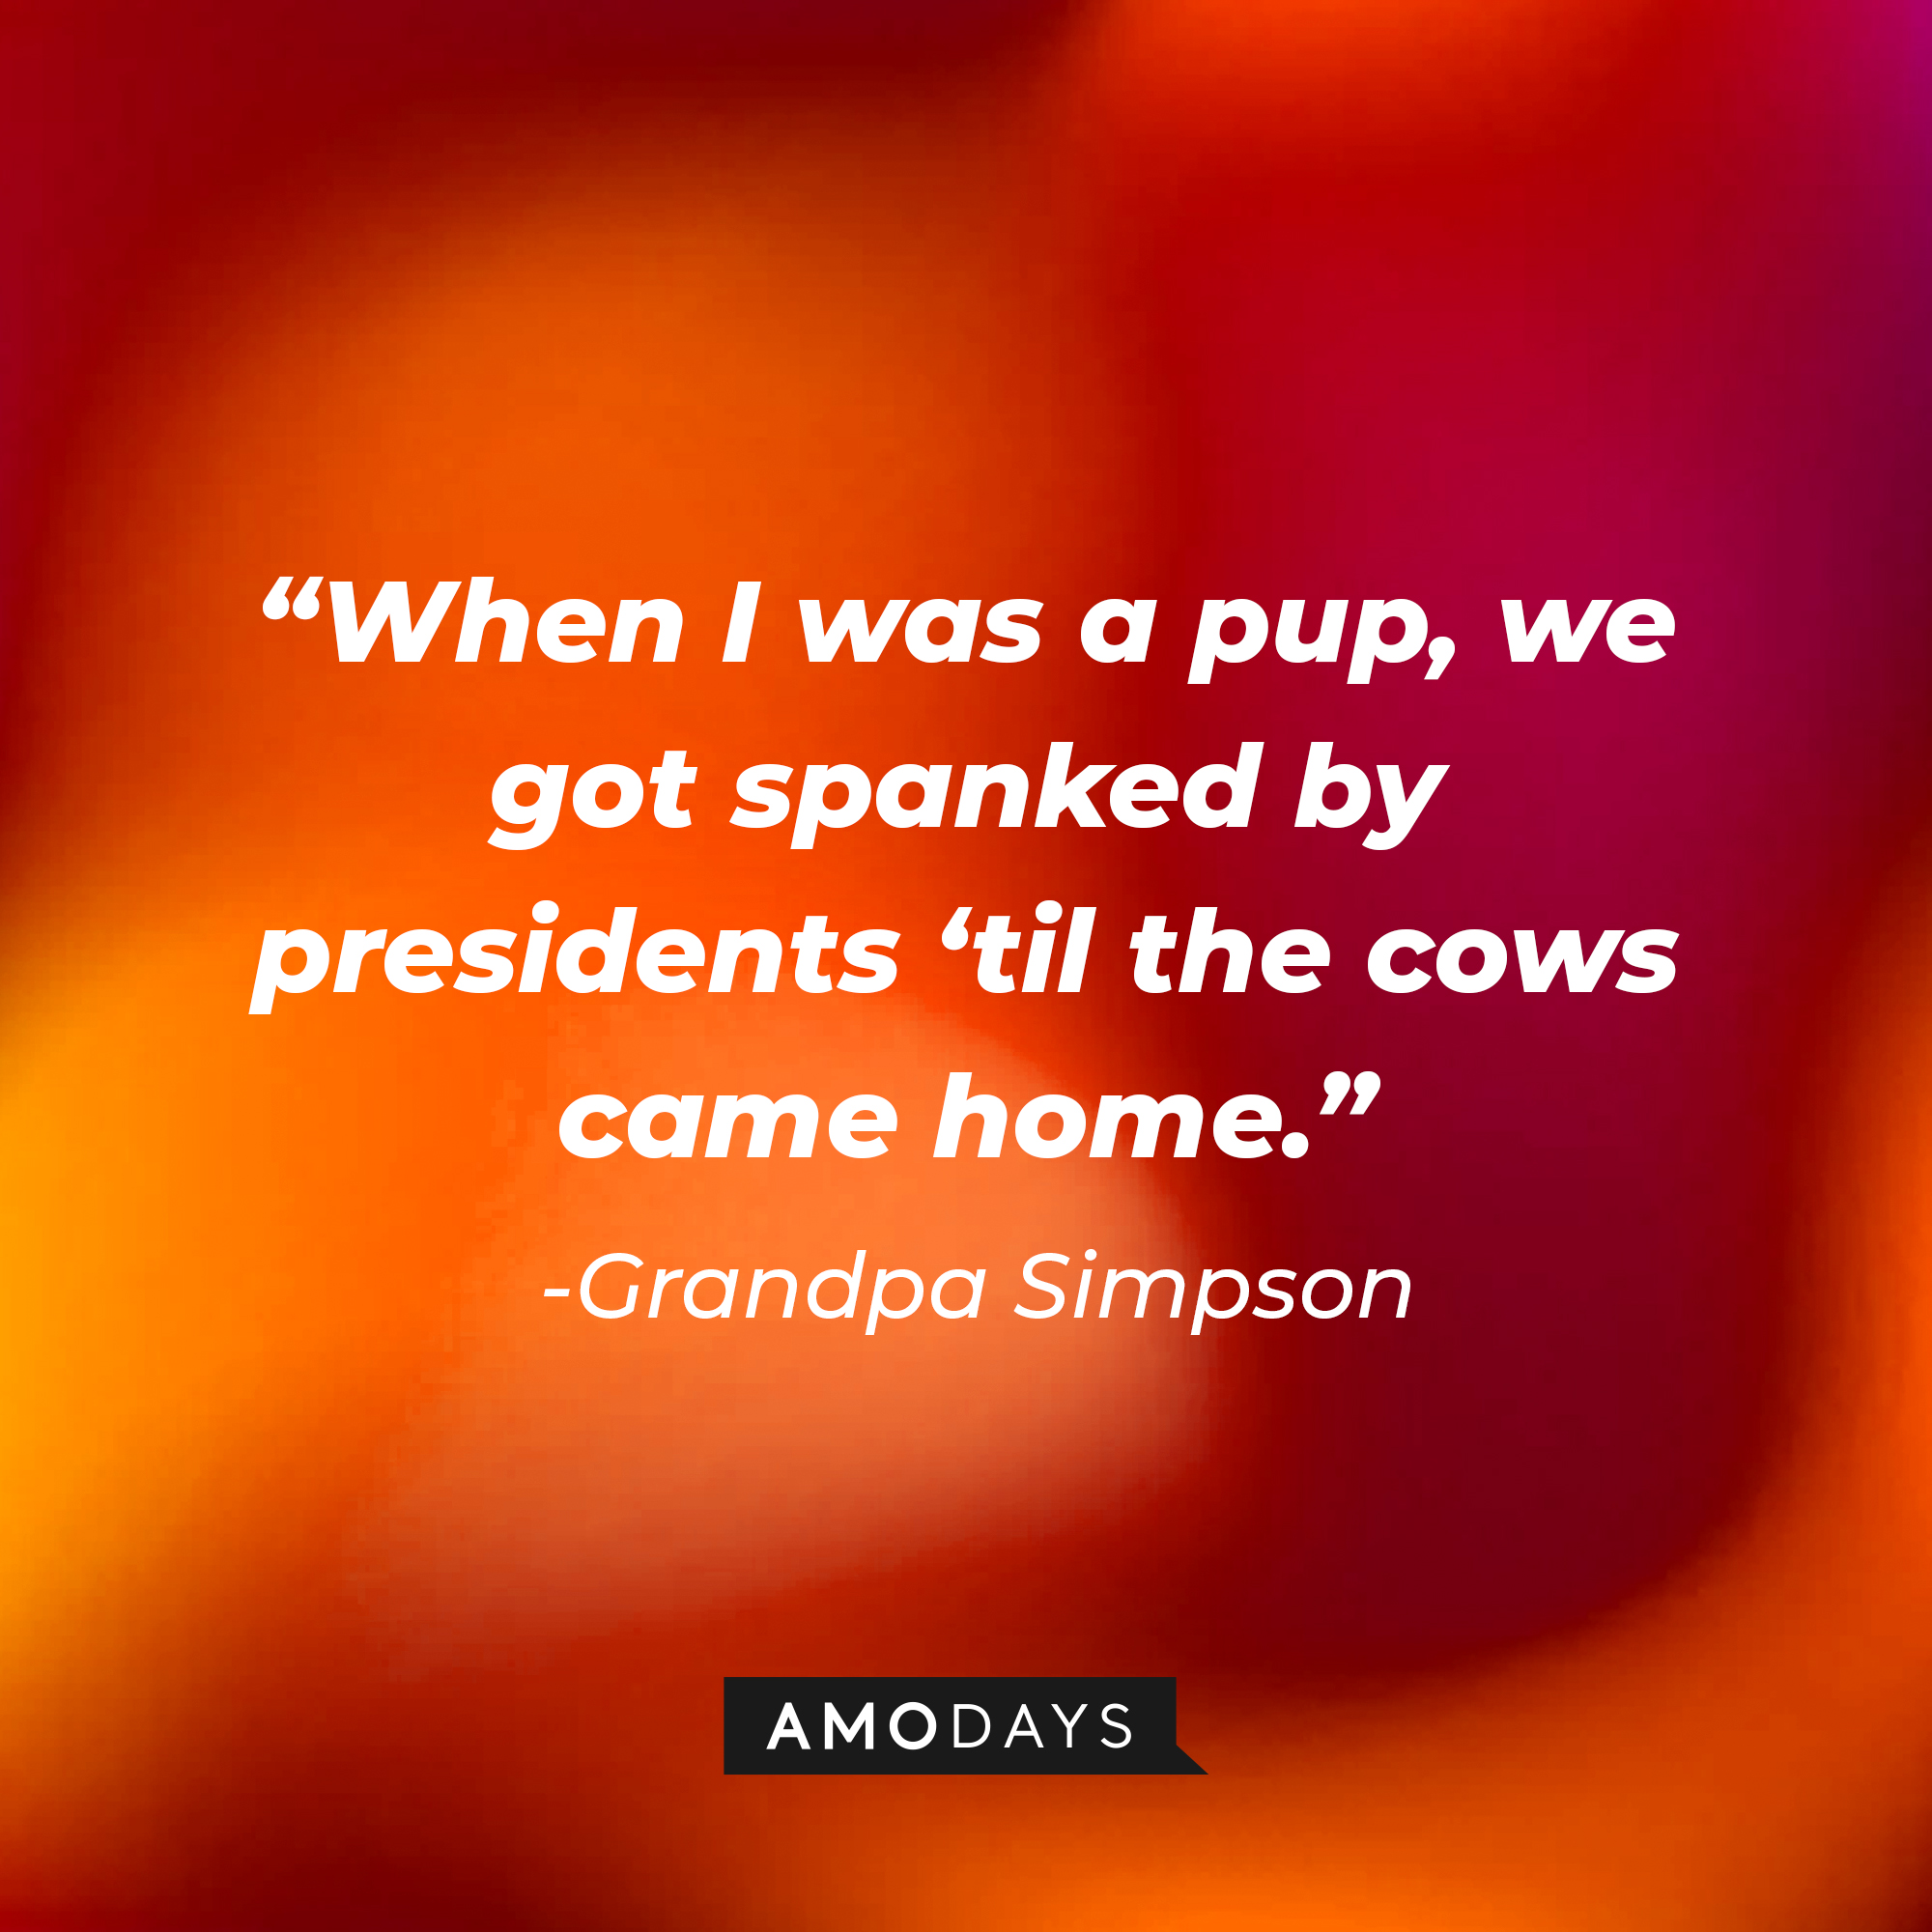 Grandpa Simpson's quote: “When I was a pup, we got spanked by presidents ‘til the cows came home.”  | Source: AmoDays